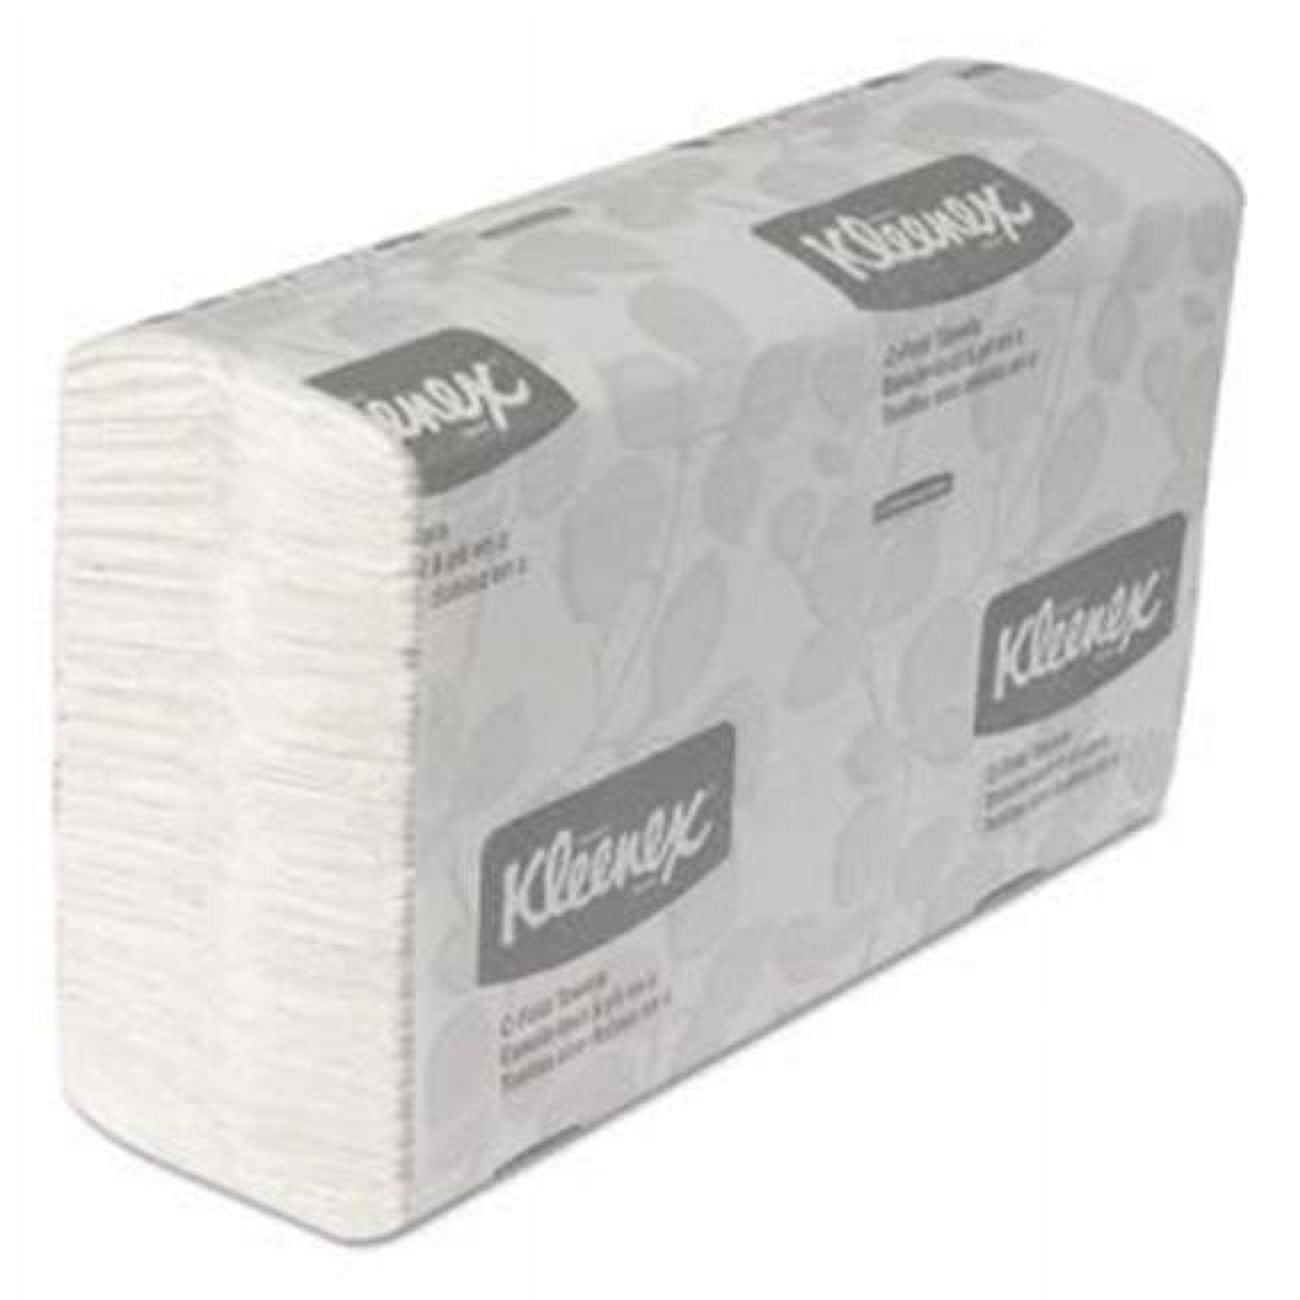 01500 13 x 10.25 in. Kleenex White C-Fold Paper Towels - Case of 2400 -  Kimberly-Clark, 01500  (PE)